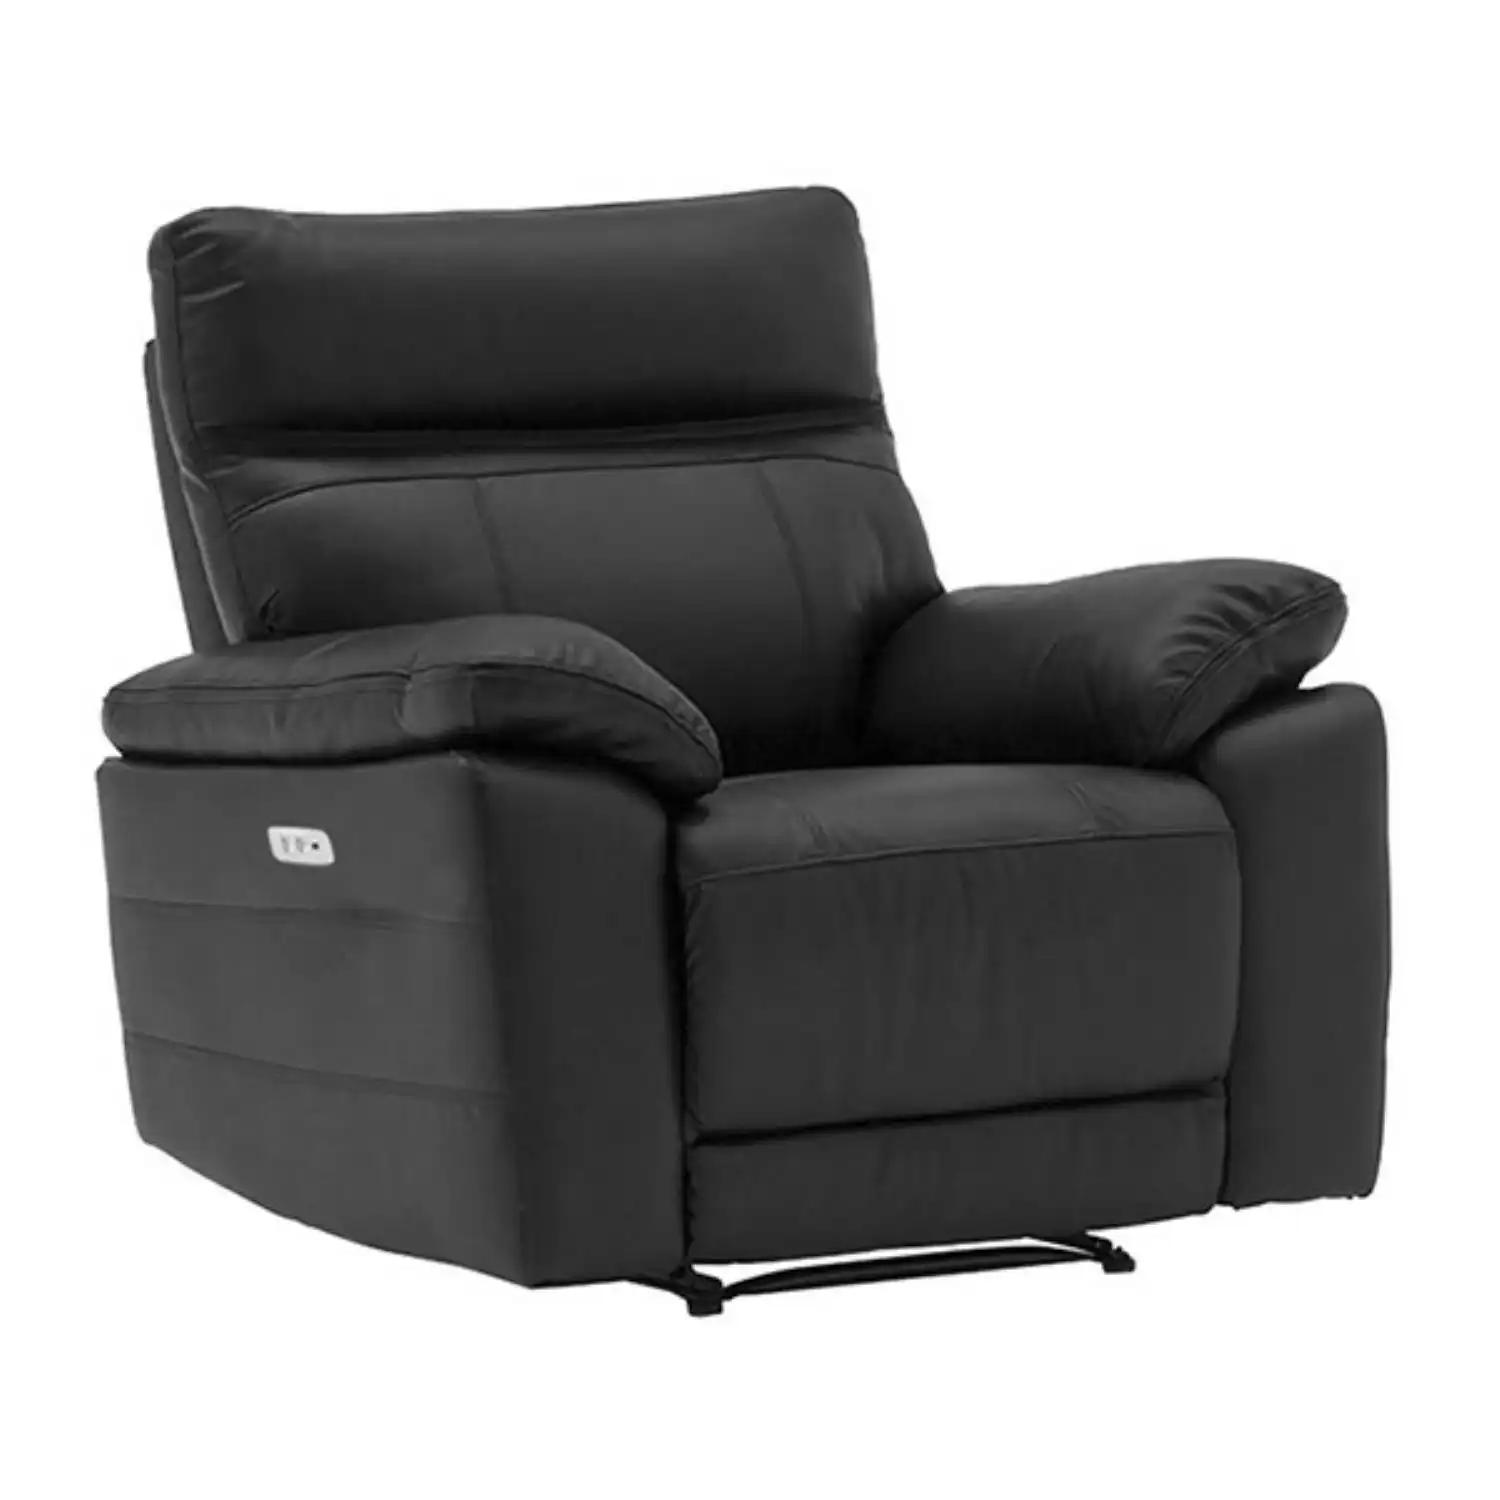 Black Leather 1 Seater Electric Recliner Chair